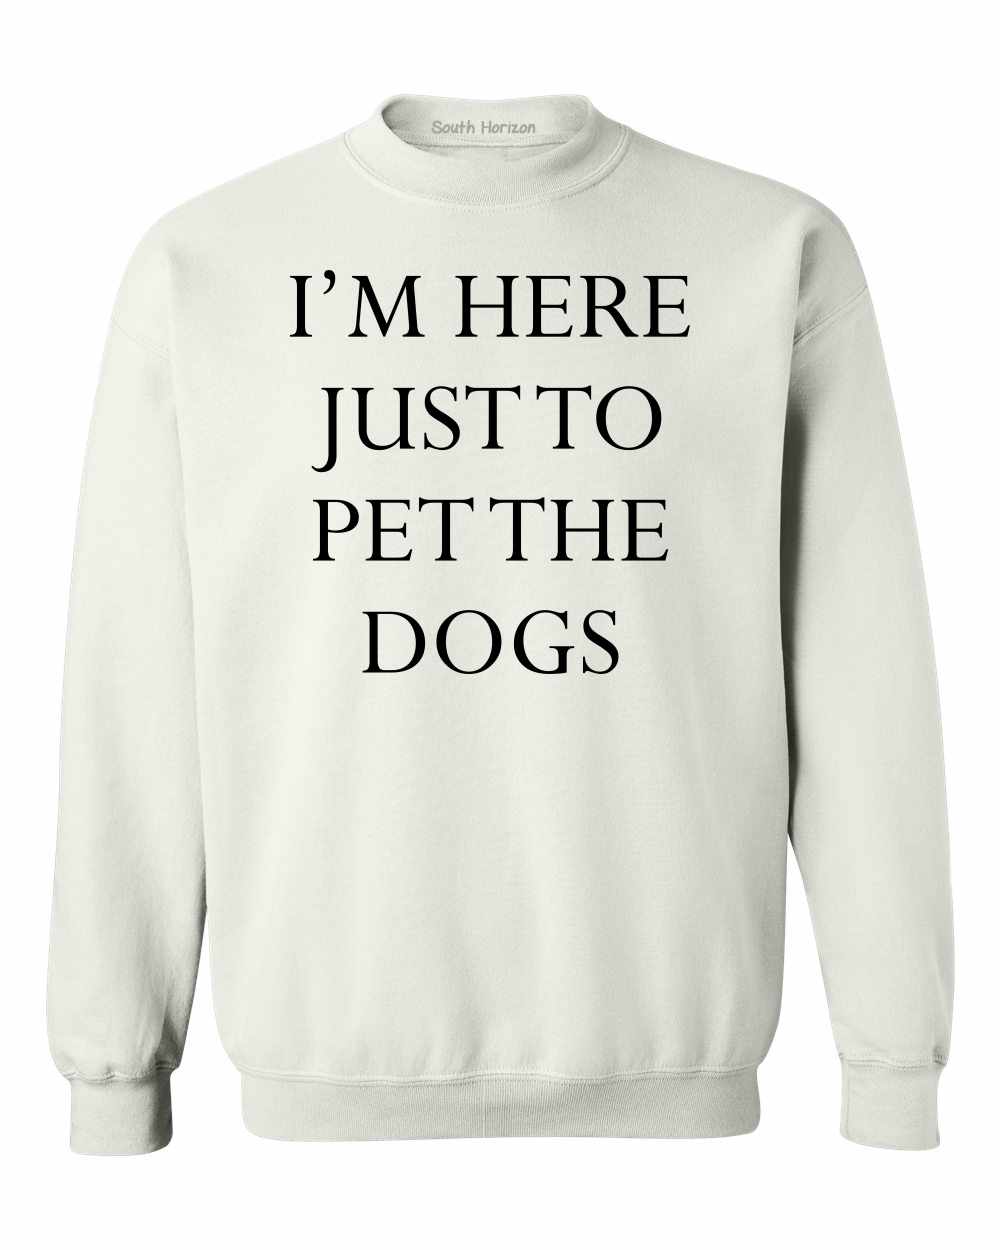 I'M HERE JUST TO PET THE DOGS on SweatShirt